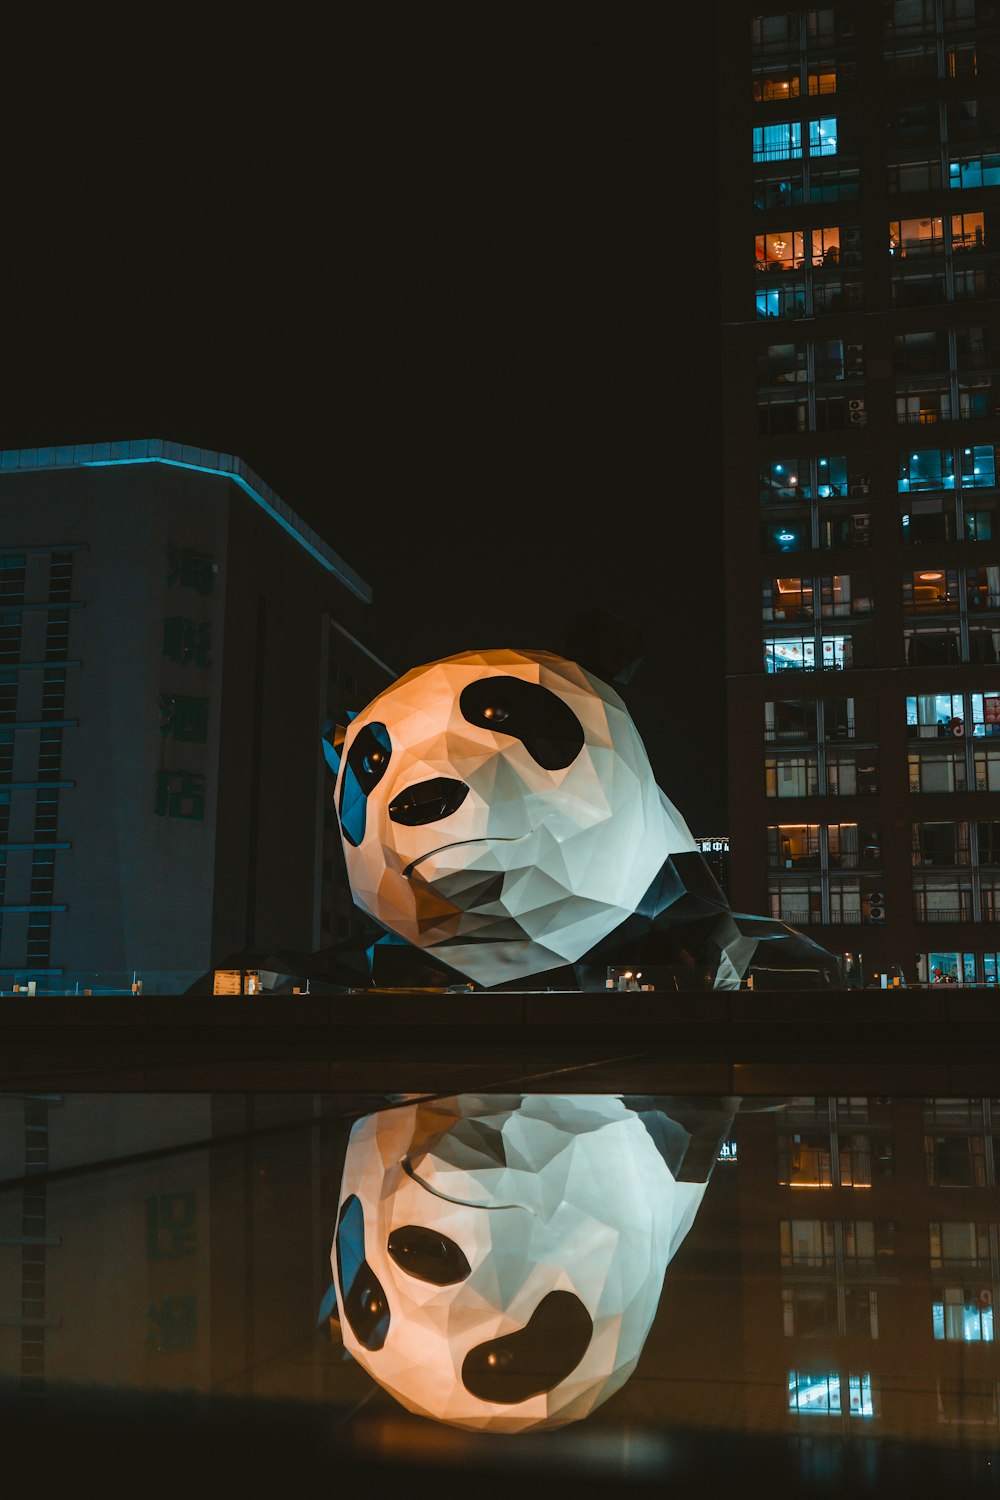 a large sculpture of a panda bear in front of a building